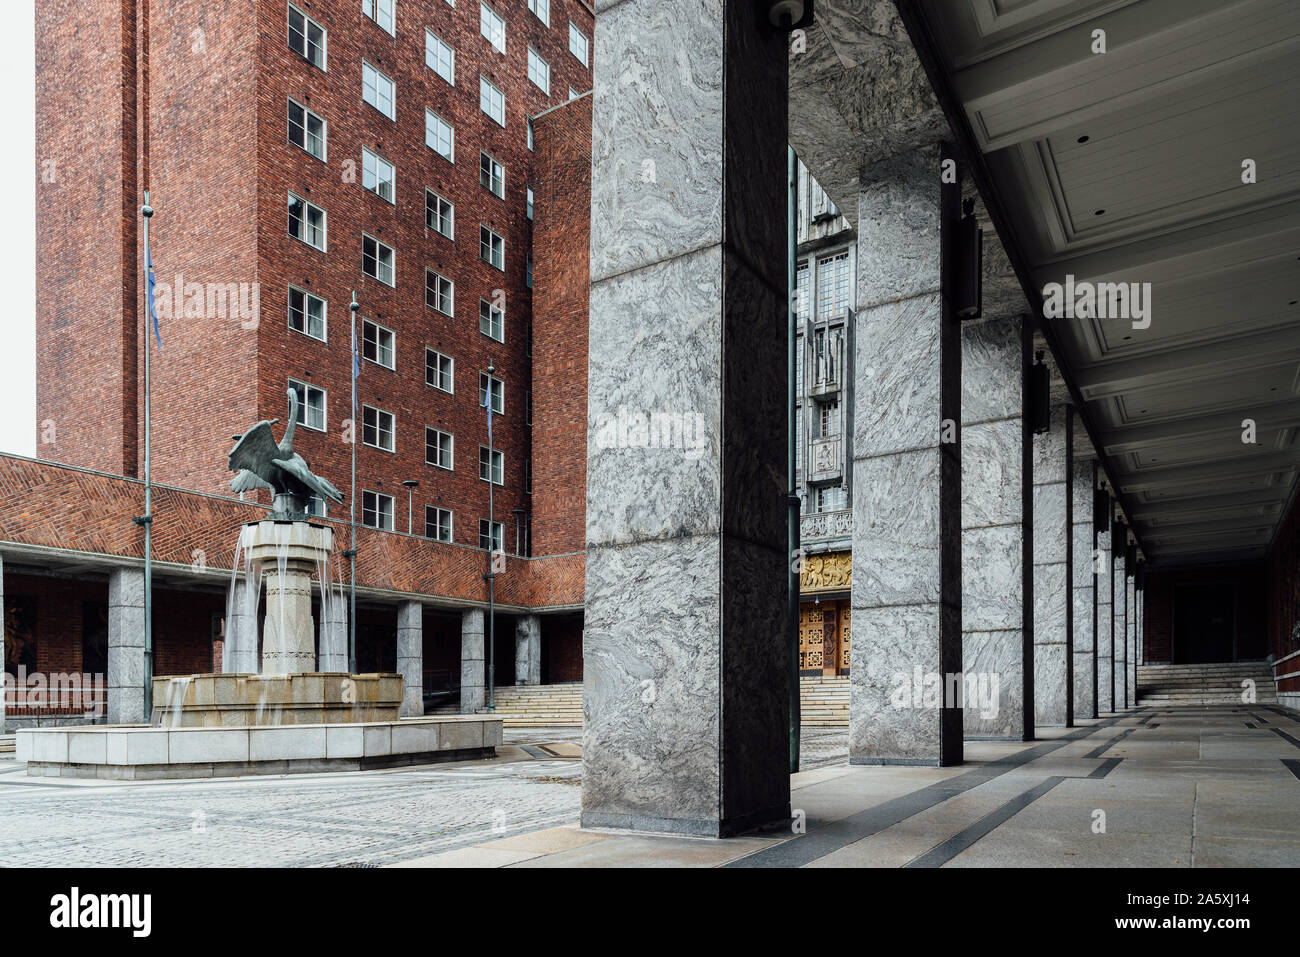 Oslo, Norway - August 11, 2019: Oslo City Hall. It houses the city council. It is the seat of the ceromony of Nobel Peace Prize every year. Stock Photo